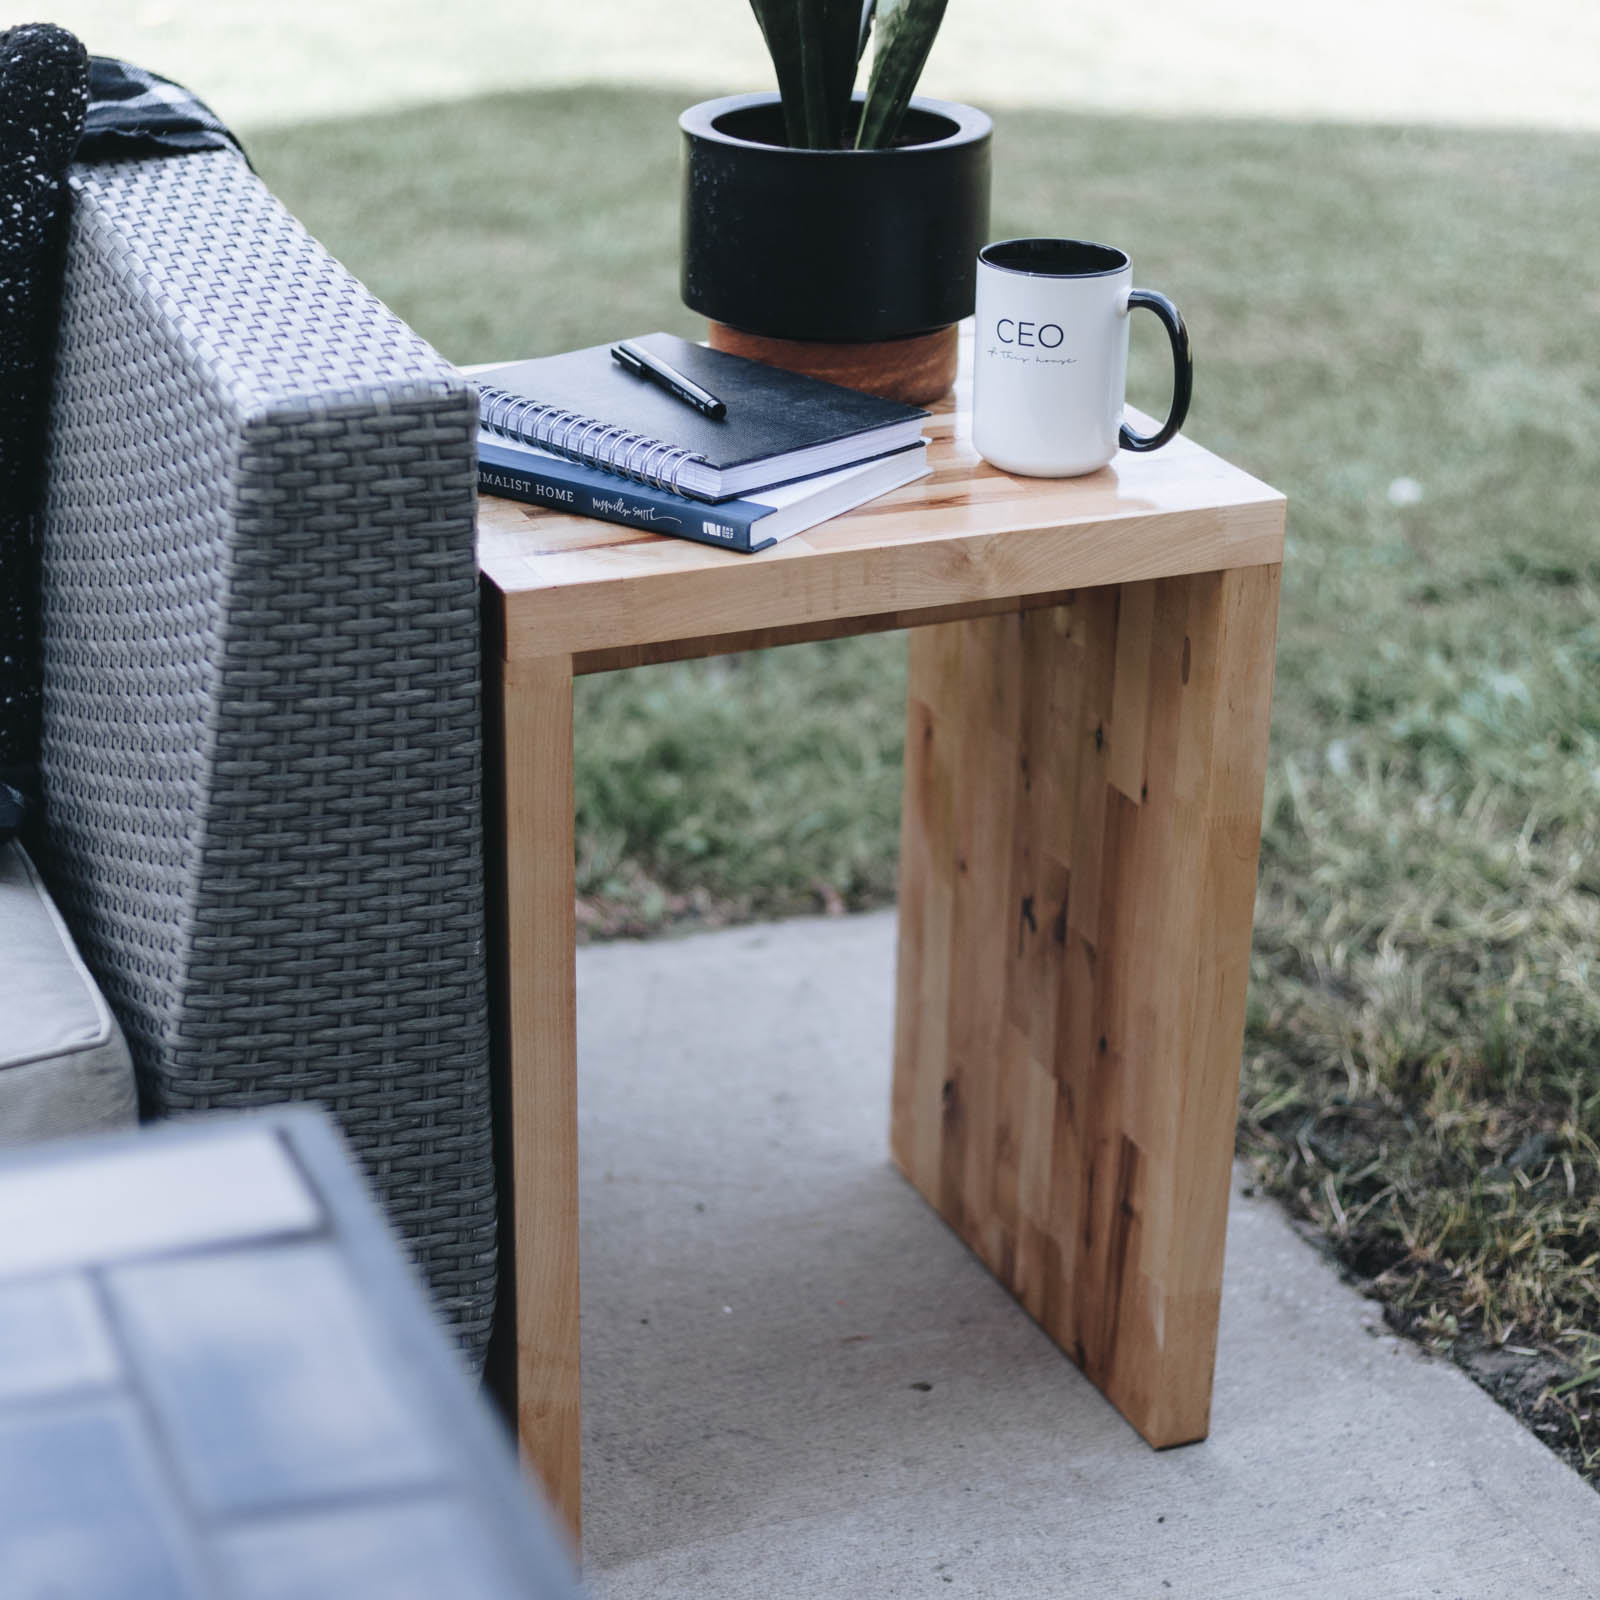 Outdoor wood side table next to outdoor sofa with plant, coffee mug, and notebooks and pen